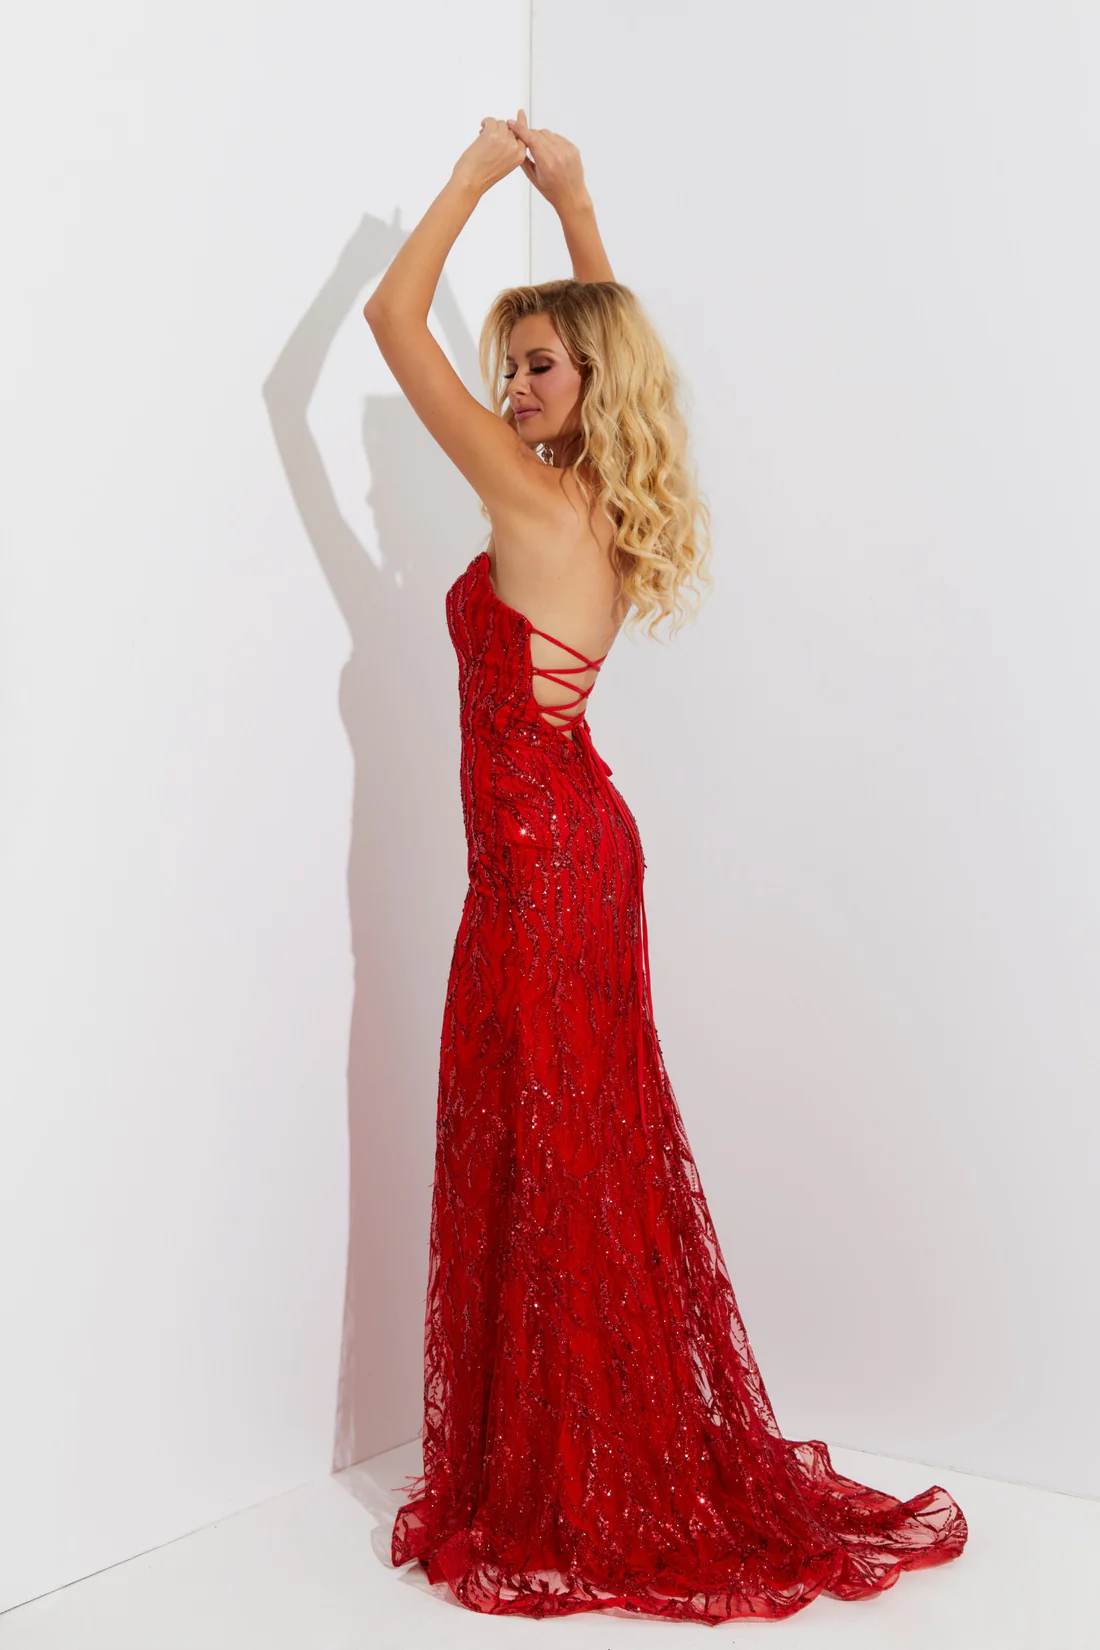 Jasz-7575-Sweetheart-Neckline-Lace-up-Back-High-Slit-Sequins-Feathers-Fitted-Red-Evening-Dress-B-Chic-Fashions-Prom-Dress